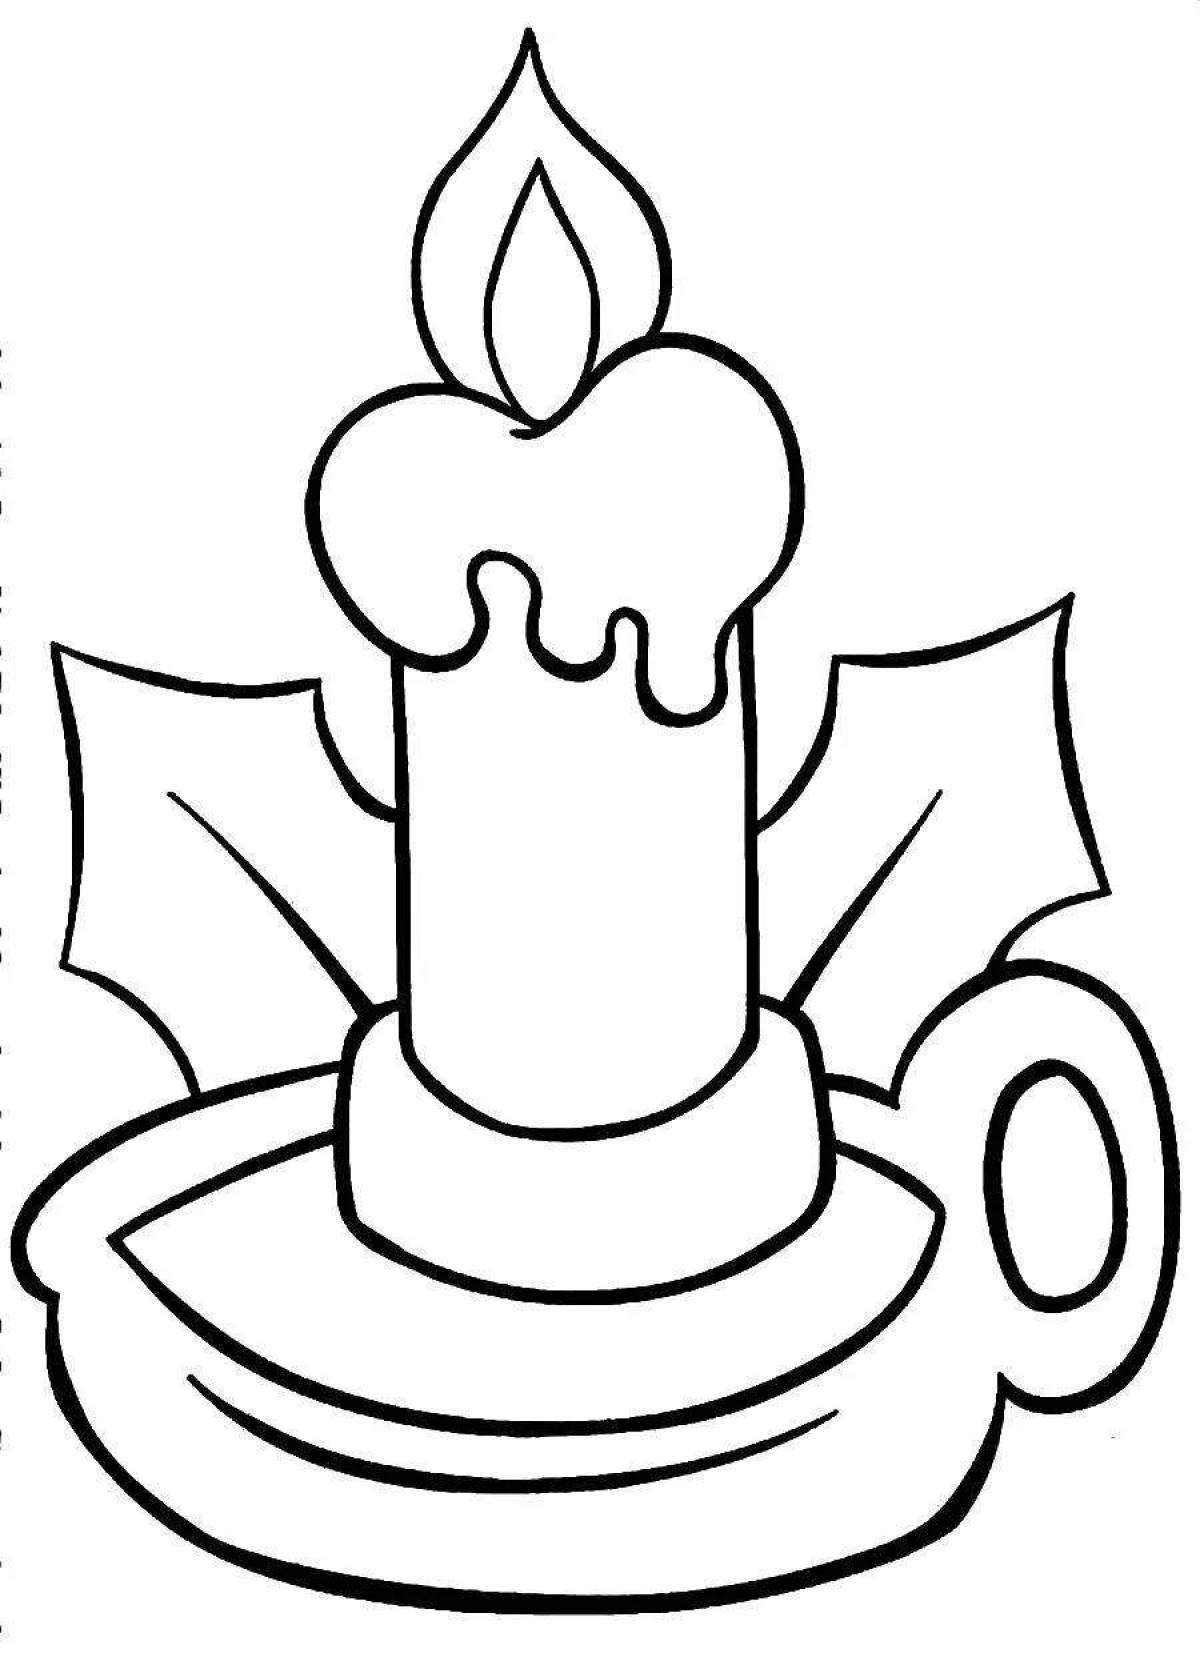 Fairytale candles coloring book for kids